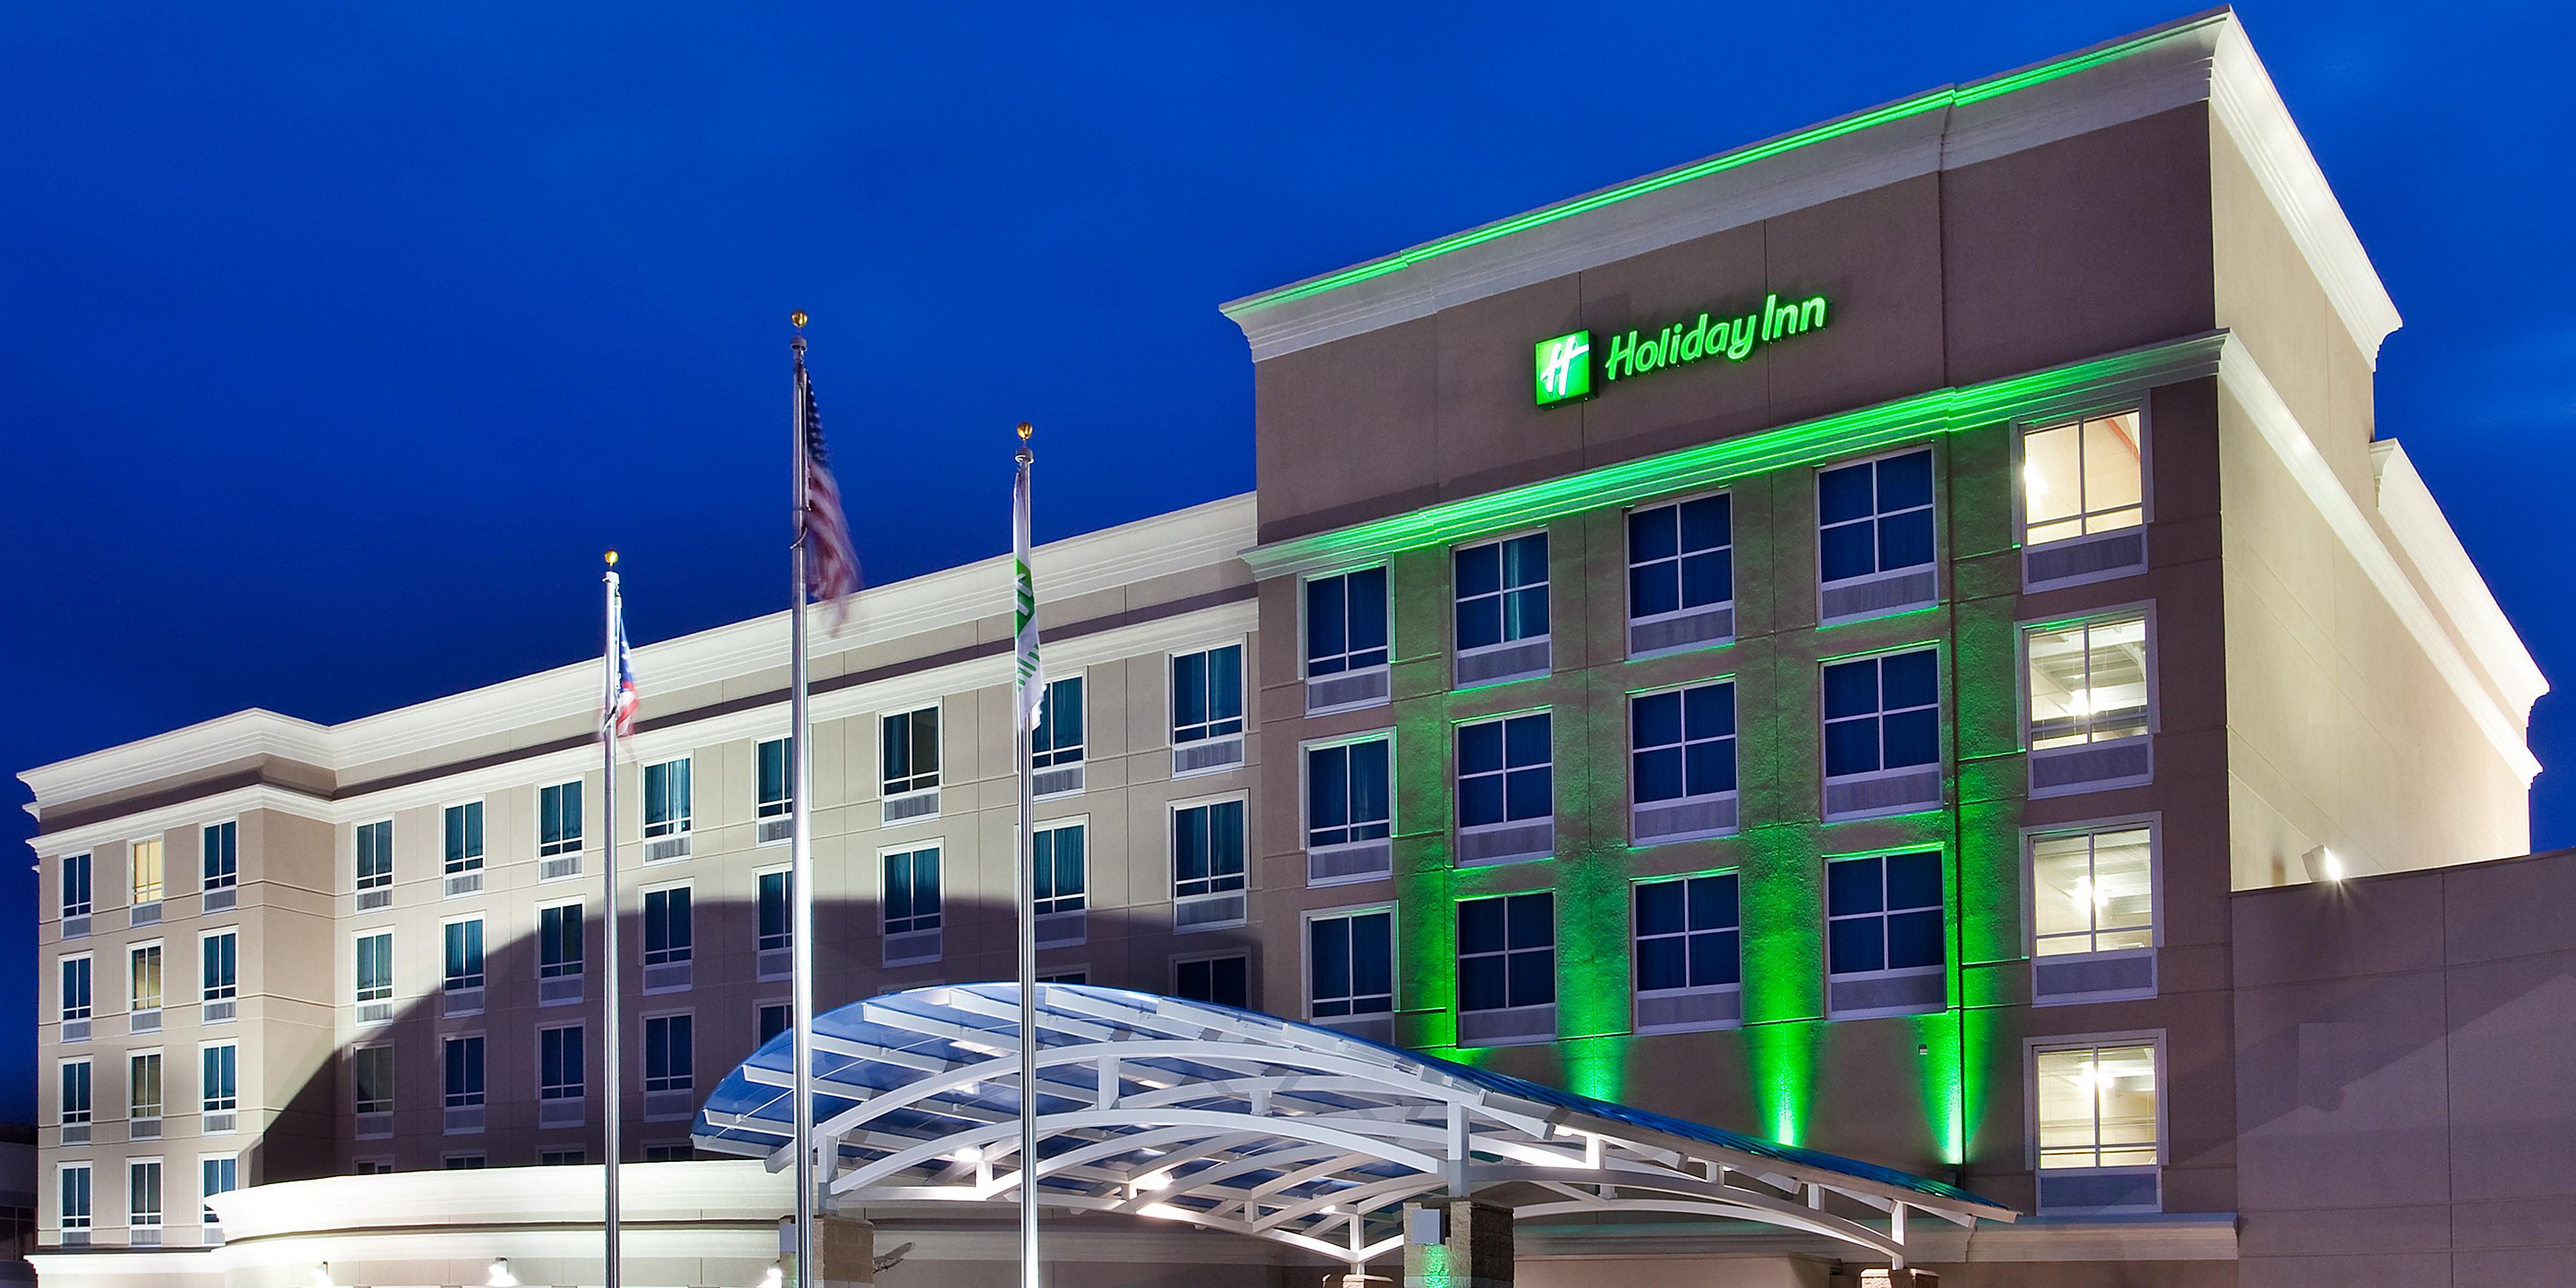 A friendly welcome awaits as you enter Holiday Inn Toledo Maumee